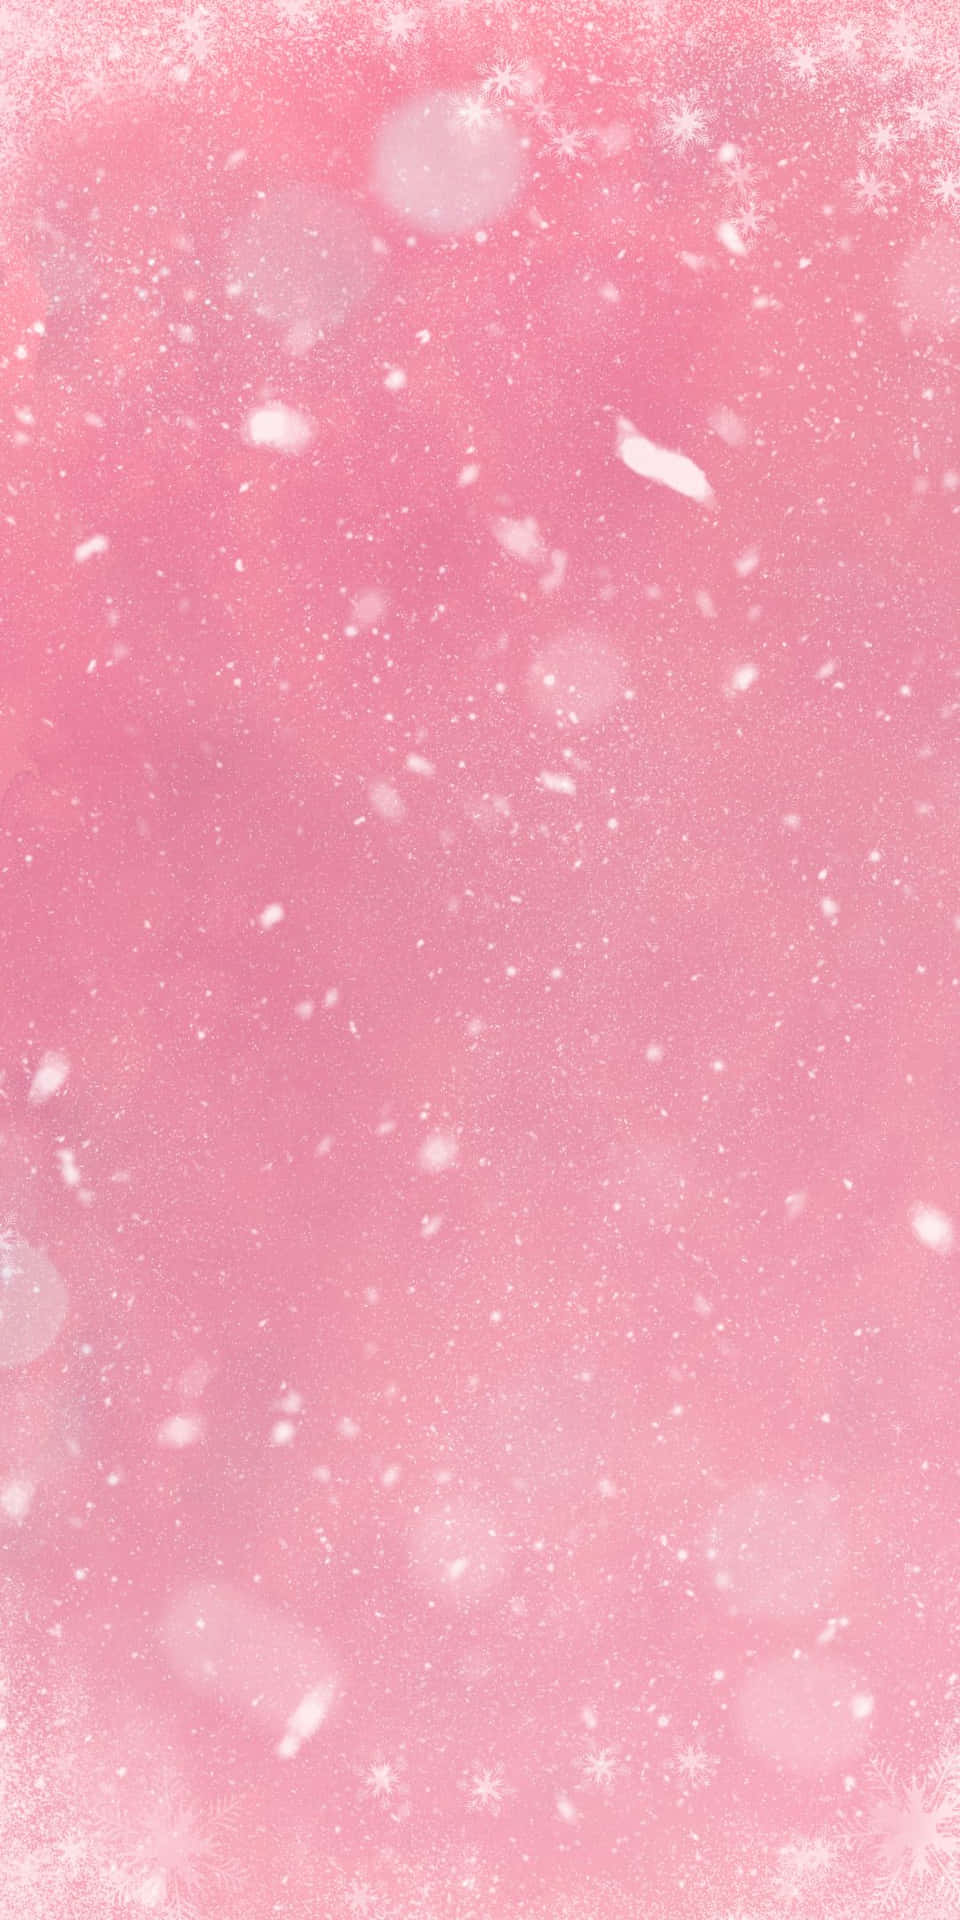 A Pink Background With Snowflakes And Snow